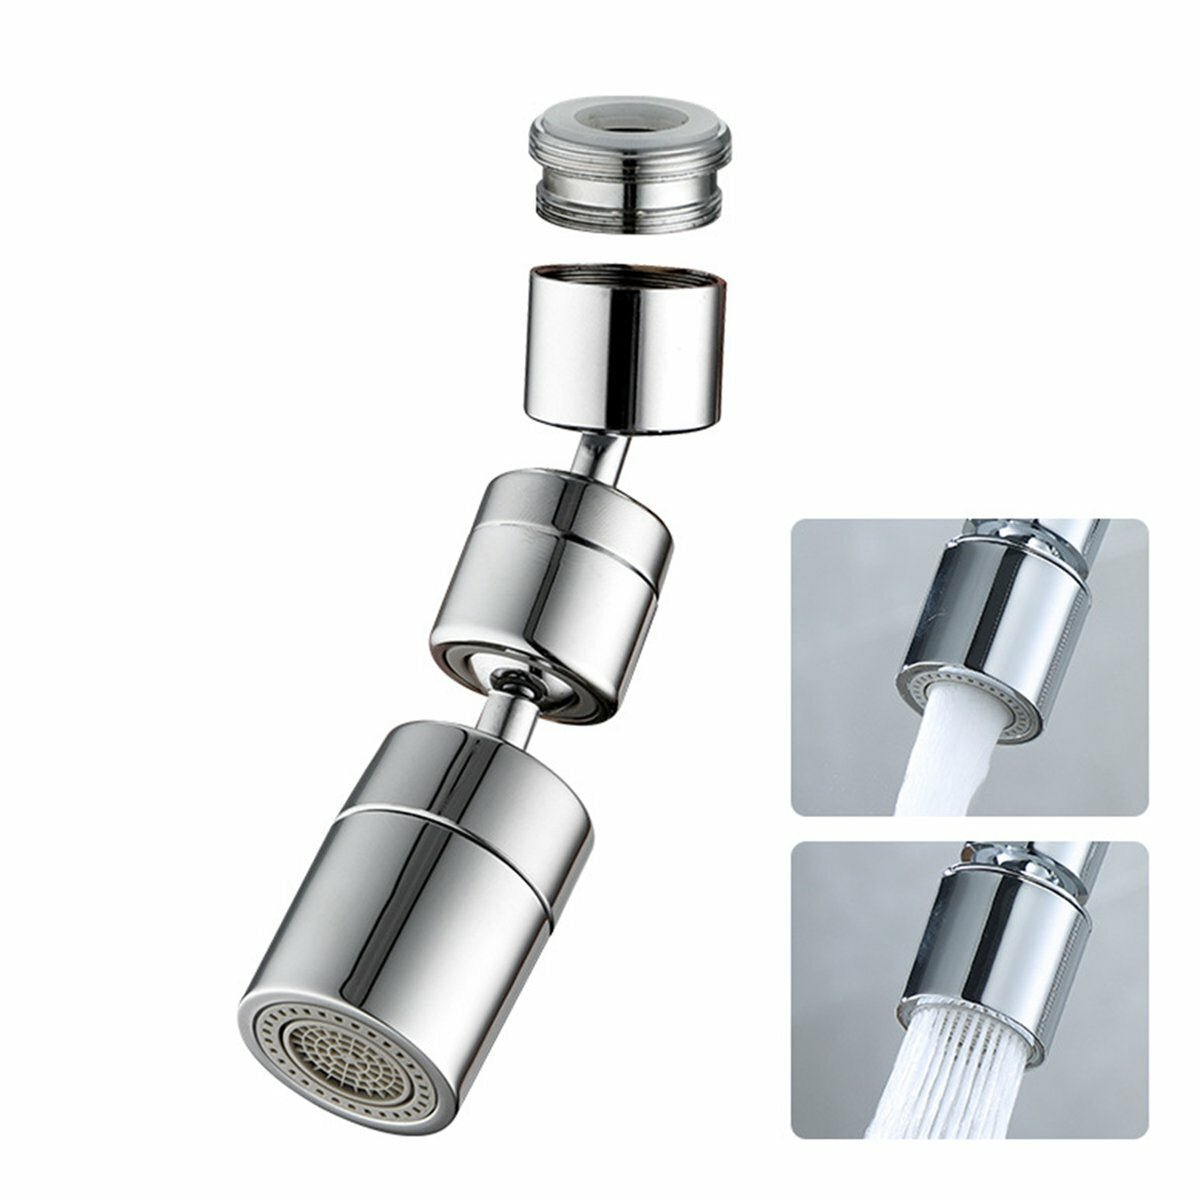 Universal Extender Splash Filter Faucet 1080 Rotate Water Outlet Faucet Silver